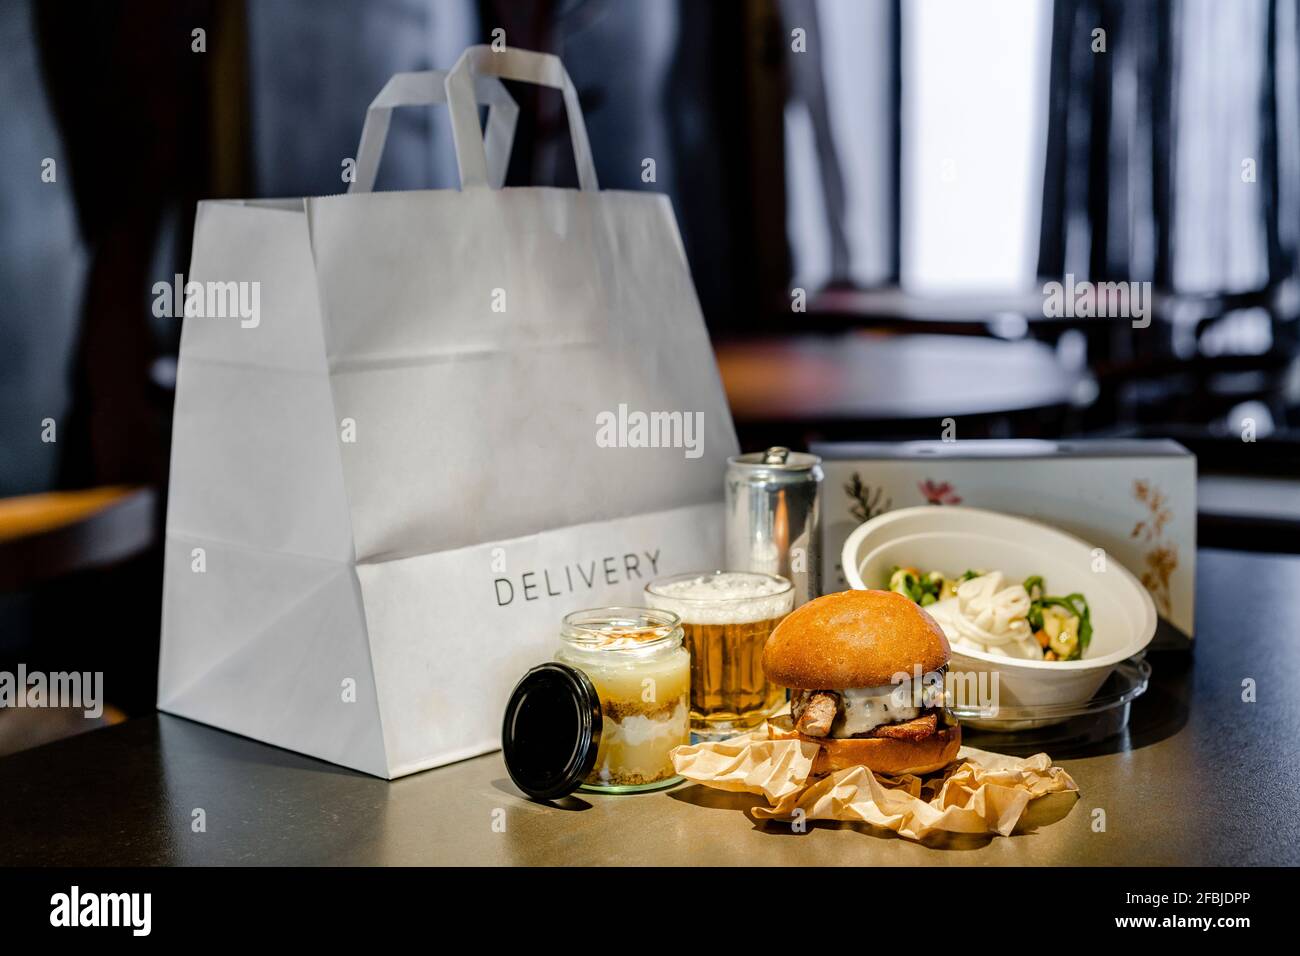 Meal with drink, dessert and salad by delivery bag and box on kitchen island Stock Photo